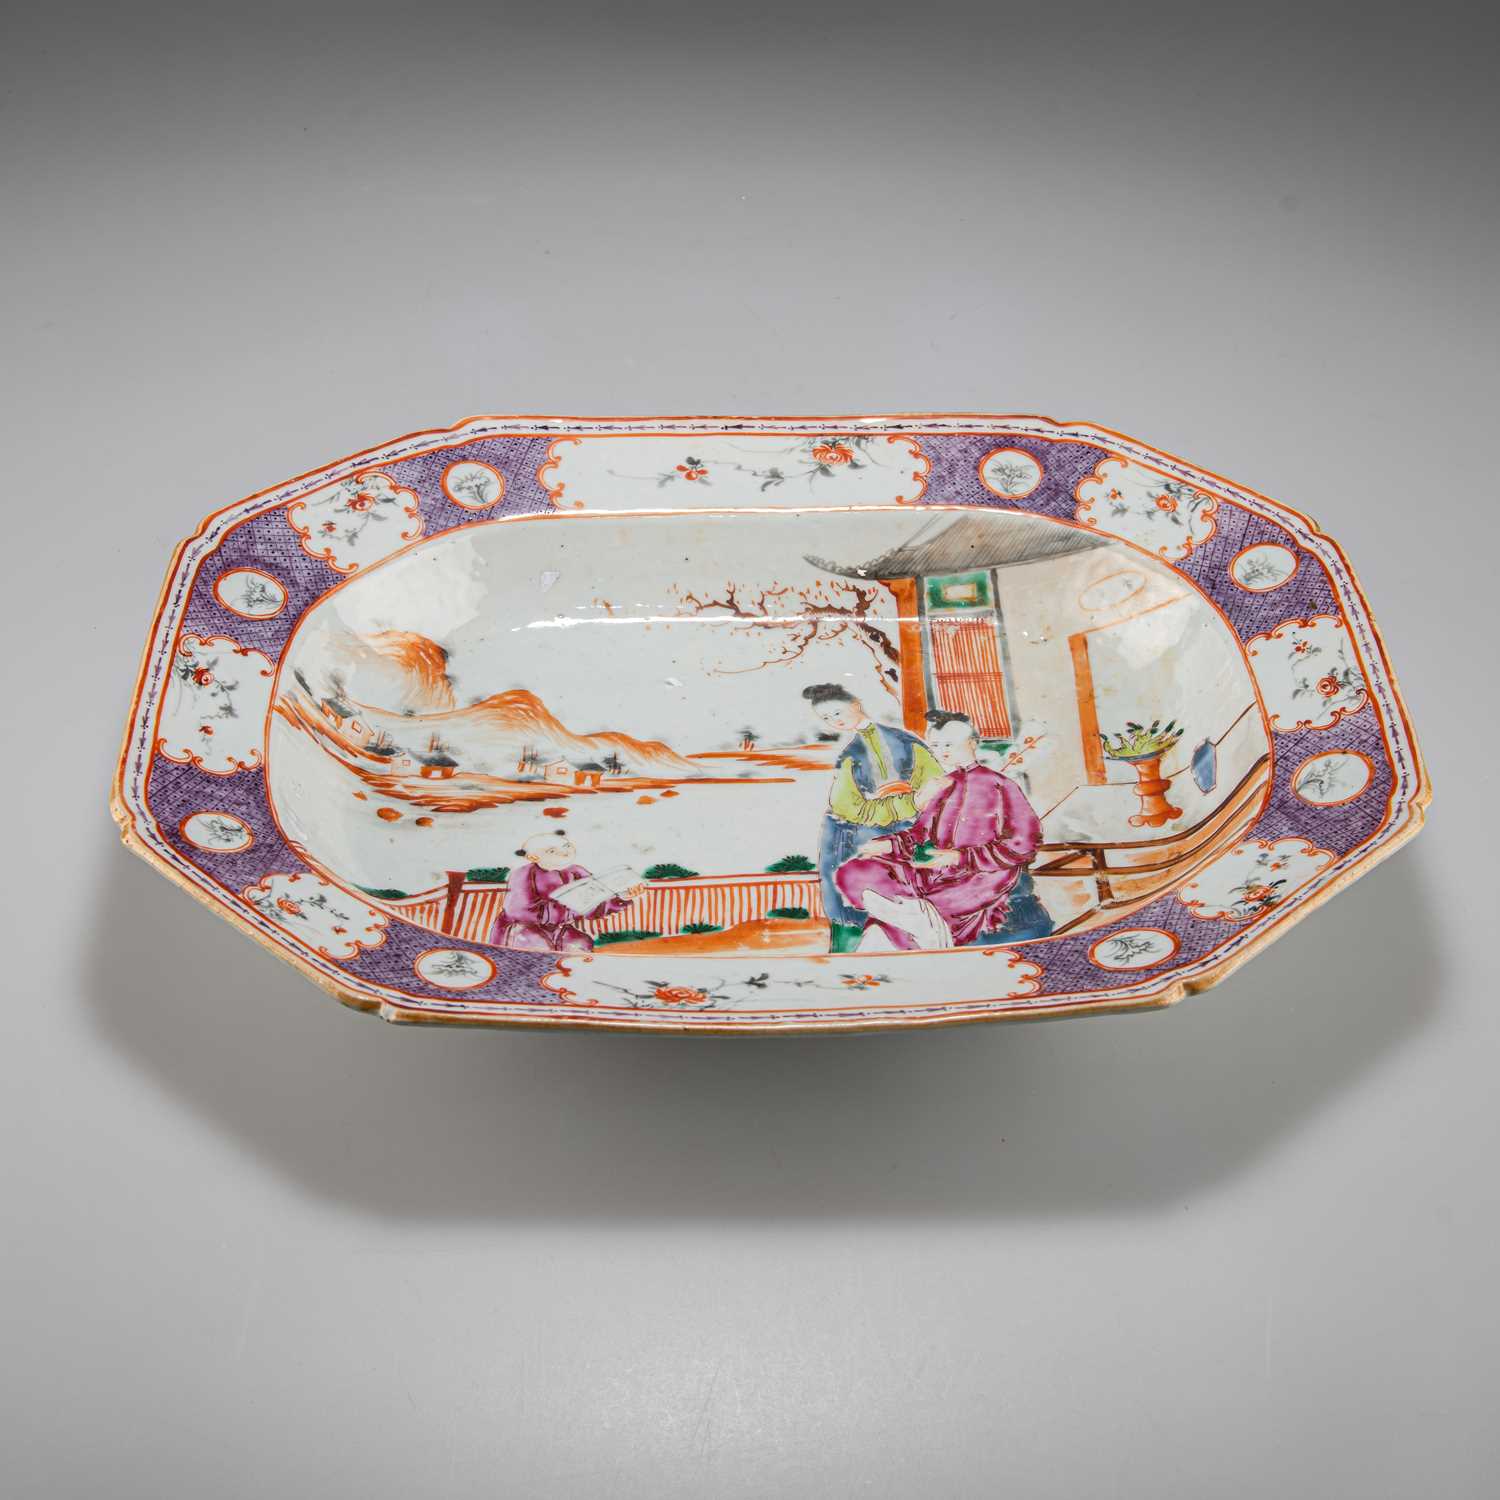 AN 18TH CENTURY CHINESE EXPORT PLATTER